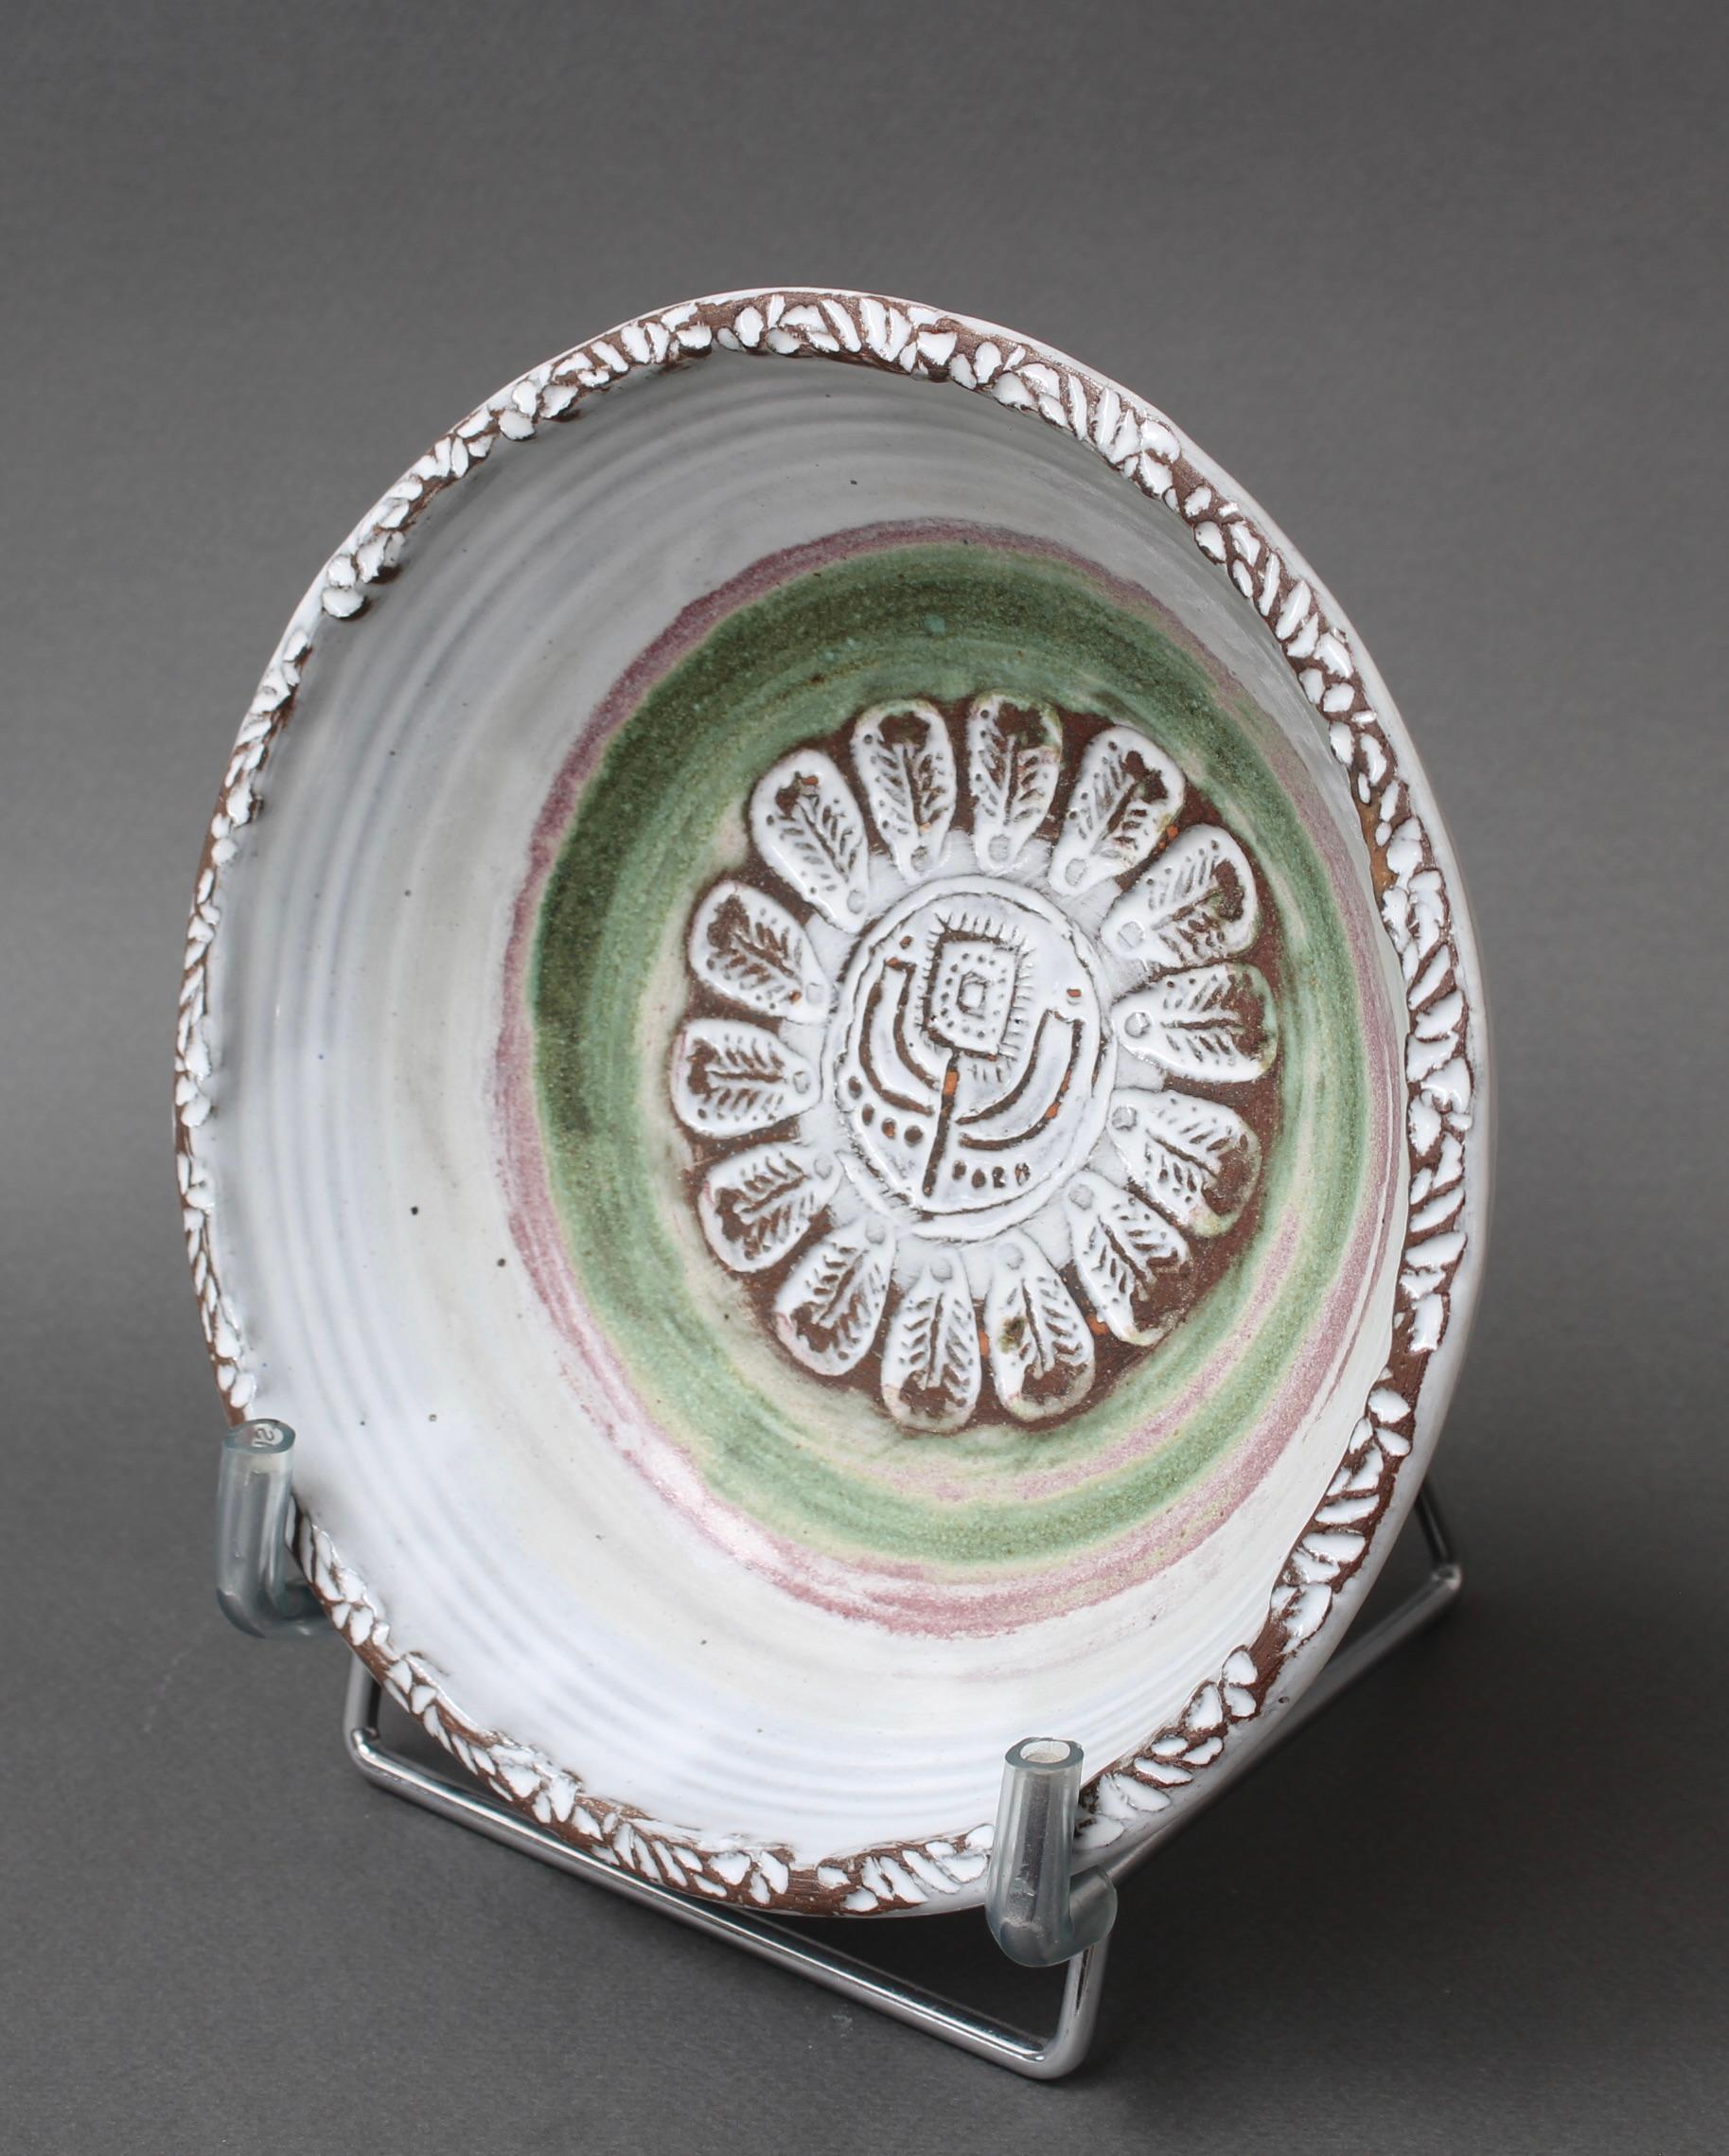 Mid-century decorative ceramic bowl (circa 1960s) by Albert Thiry (1932-2009). Small in stature but oversized in charm, a milky-white glazed central sphere at the base of the inner bowl is encircled by a deeply incised flower motif and sunburst of